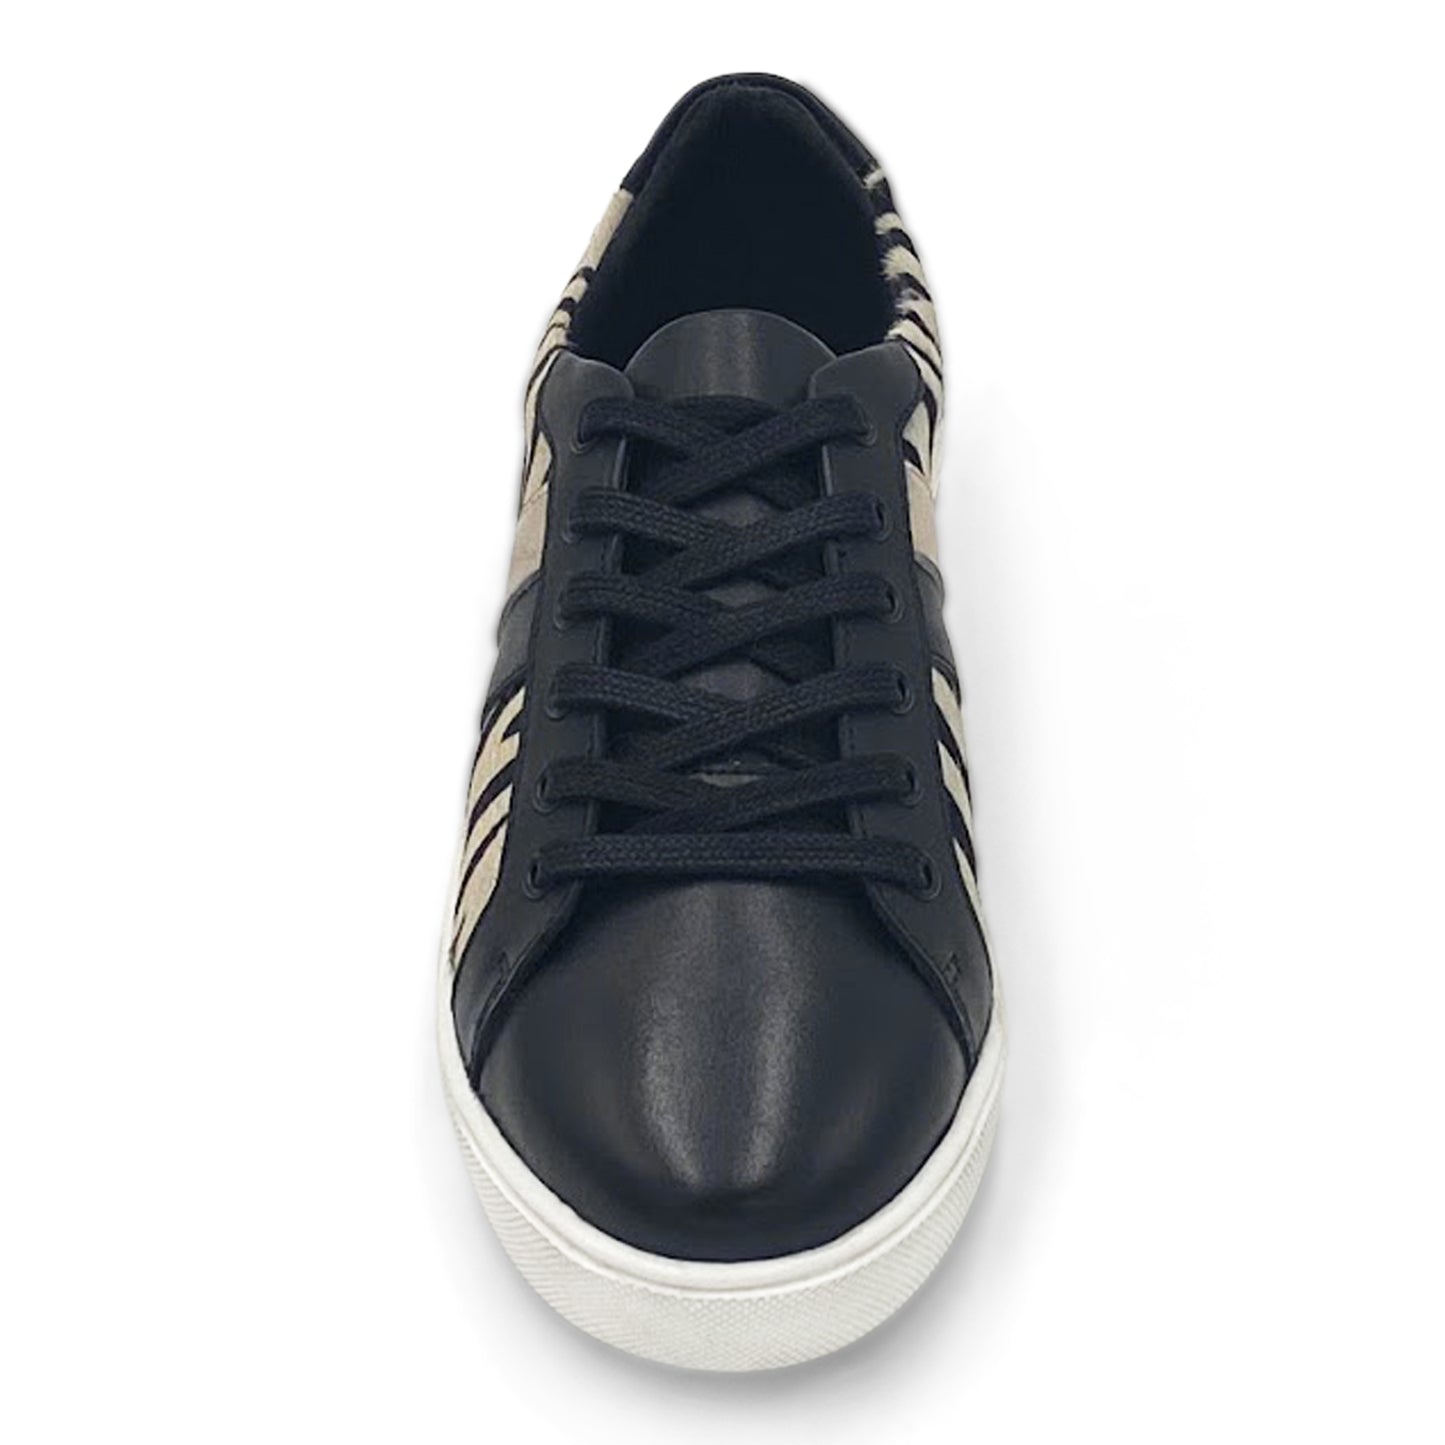 FRONT VIEW OF ZEBRA PRINT WIDE FIT LACE UP TRAINER